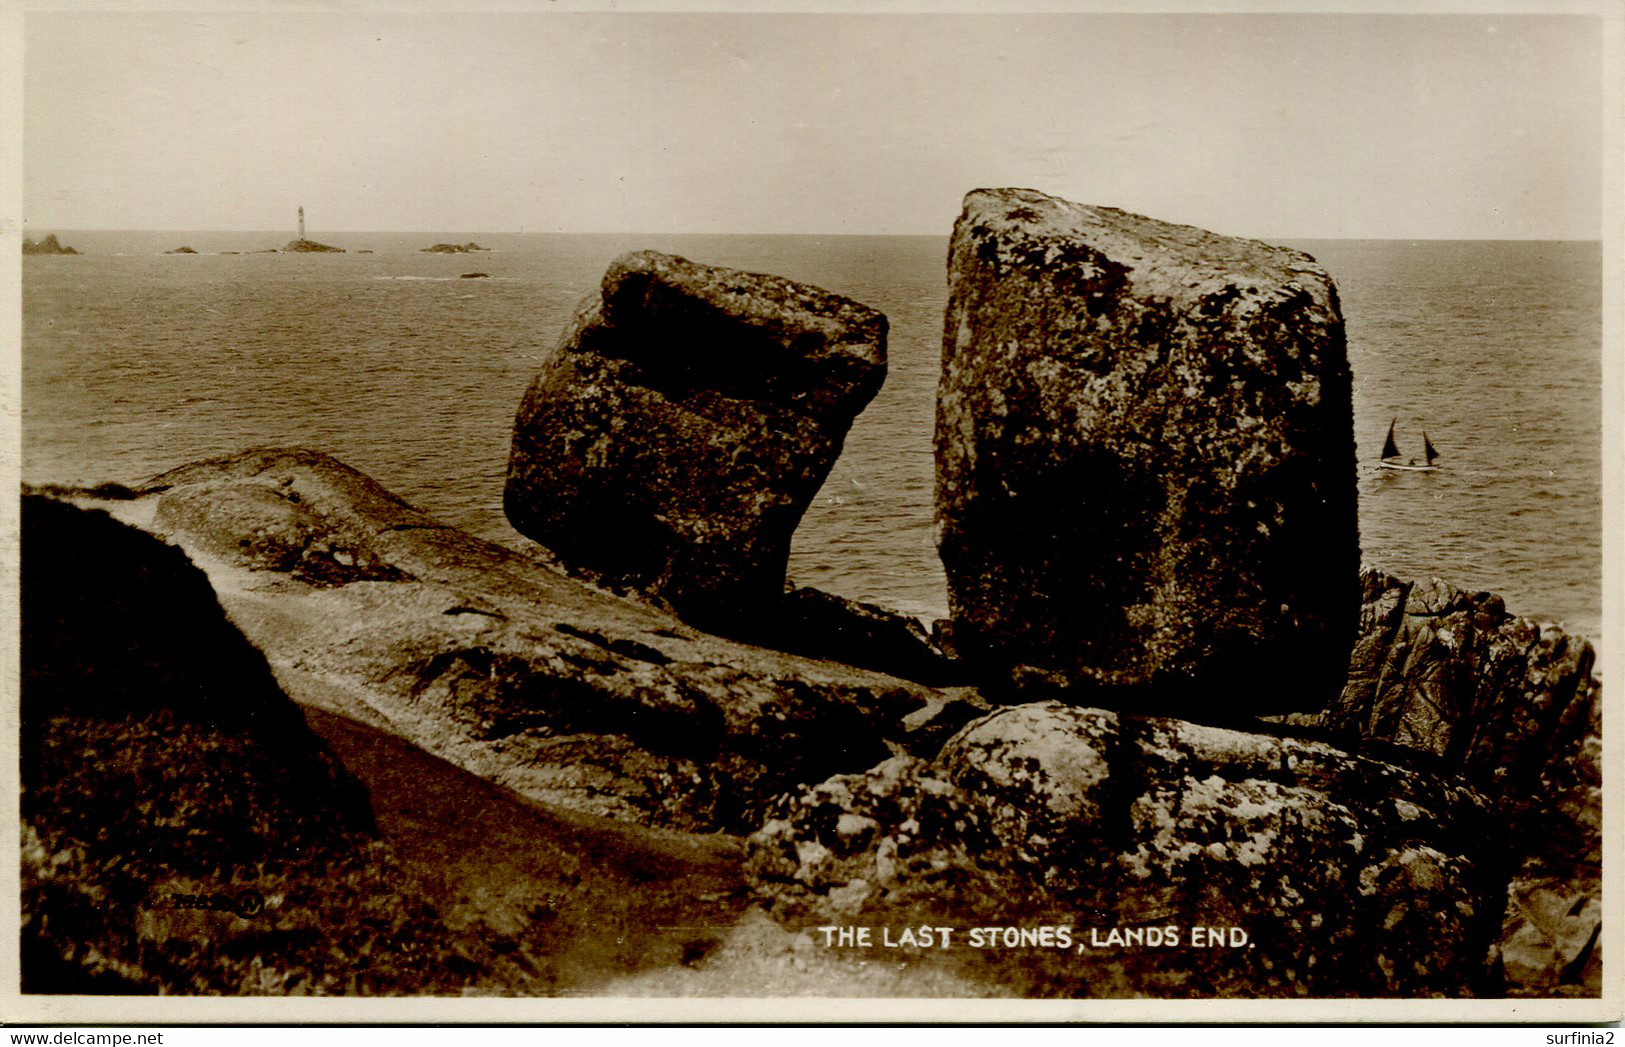 CORNWALL - LANDS END - THE LAST STONES RP Co994 - Land's End